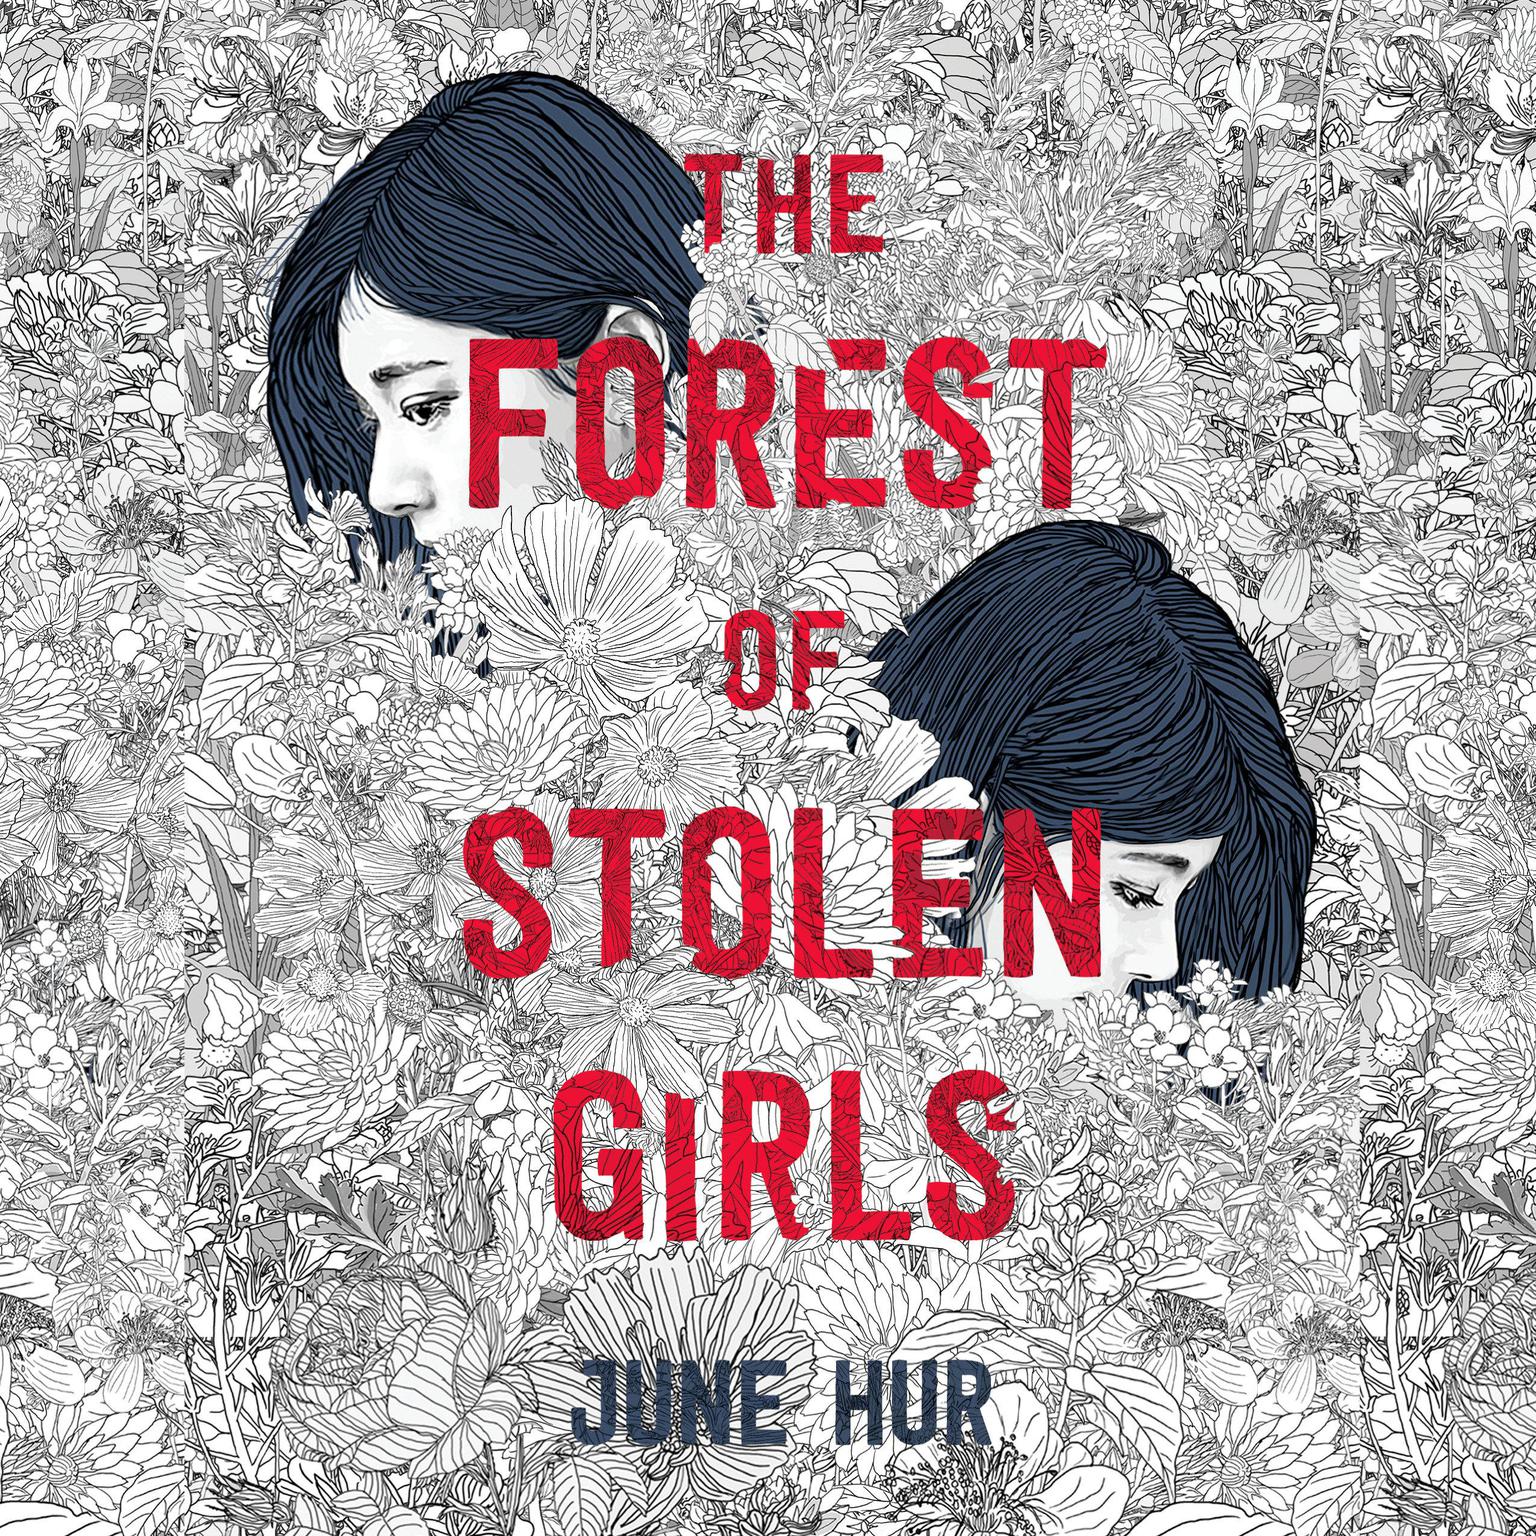 The Forest of Stolen Girls Audiobook, by June Hur